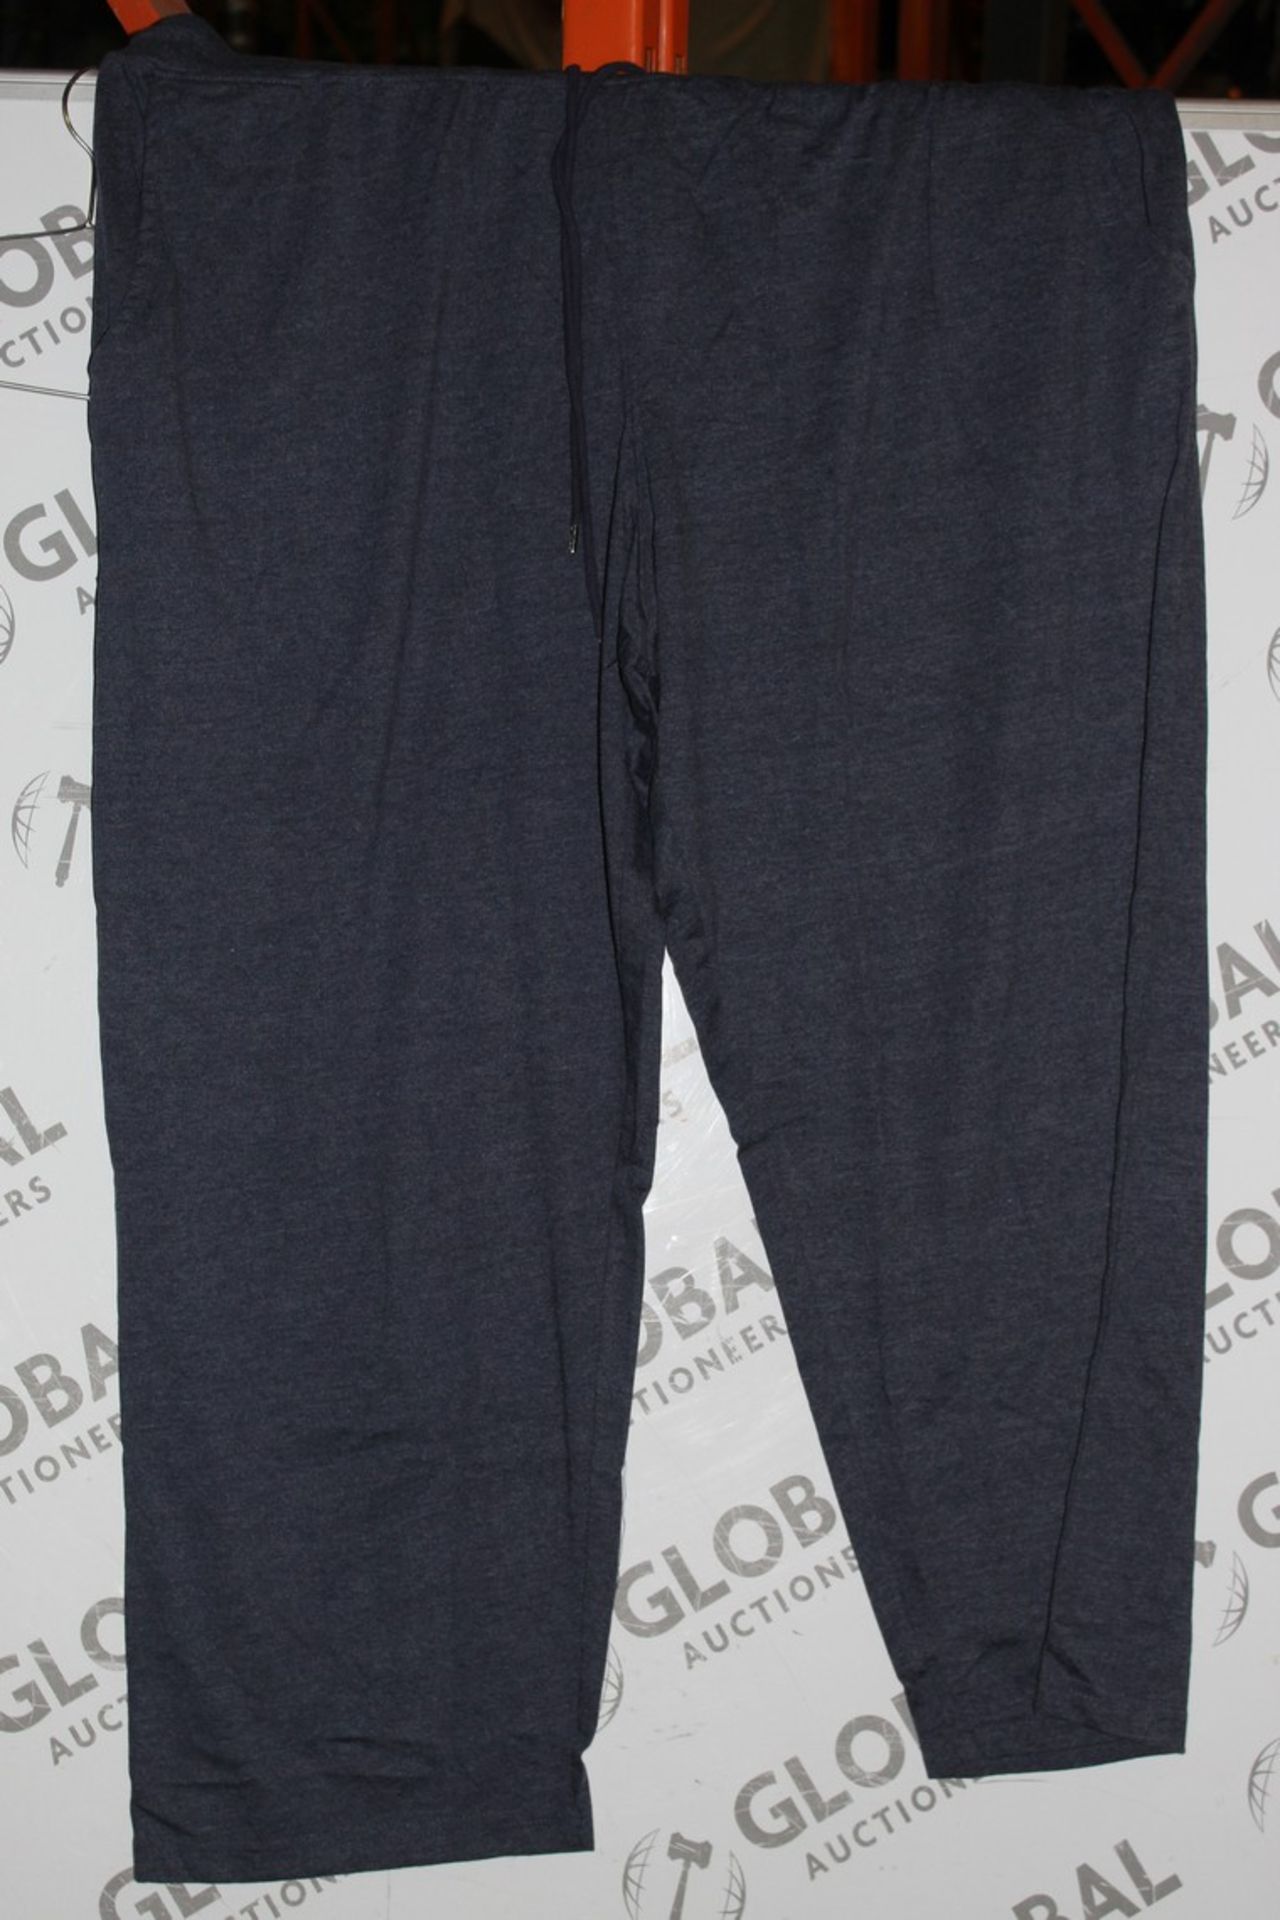 Lot to Contain 20 Brand New Twin Pack Navy and Charcoal Lounging Pants in Assorted Sizes RRP £25.